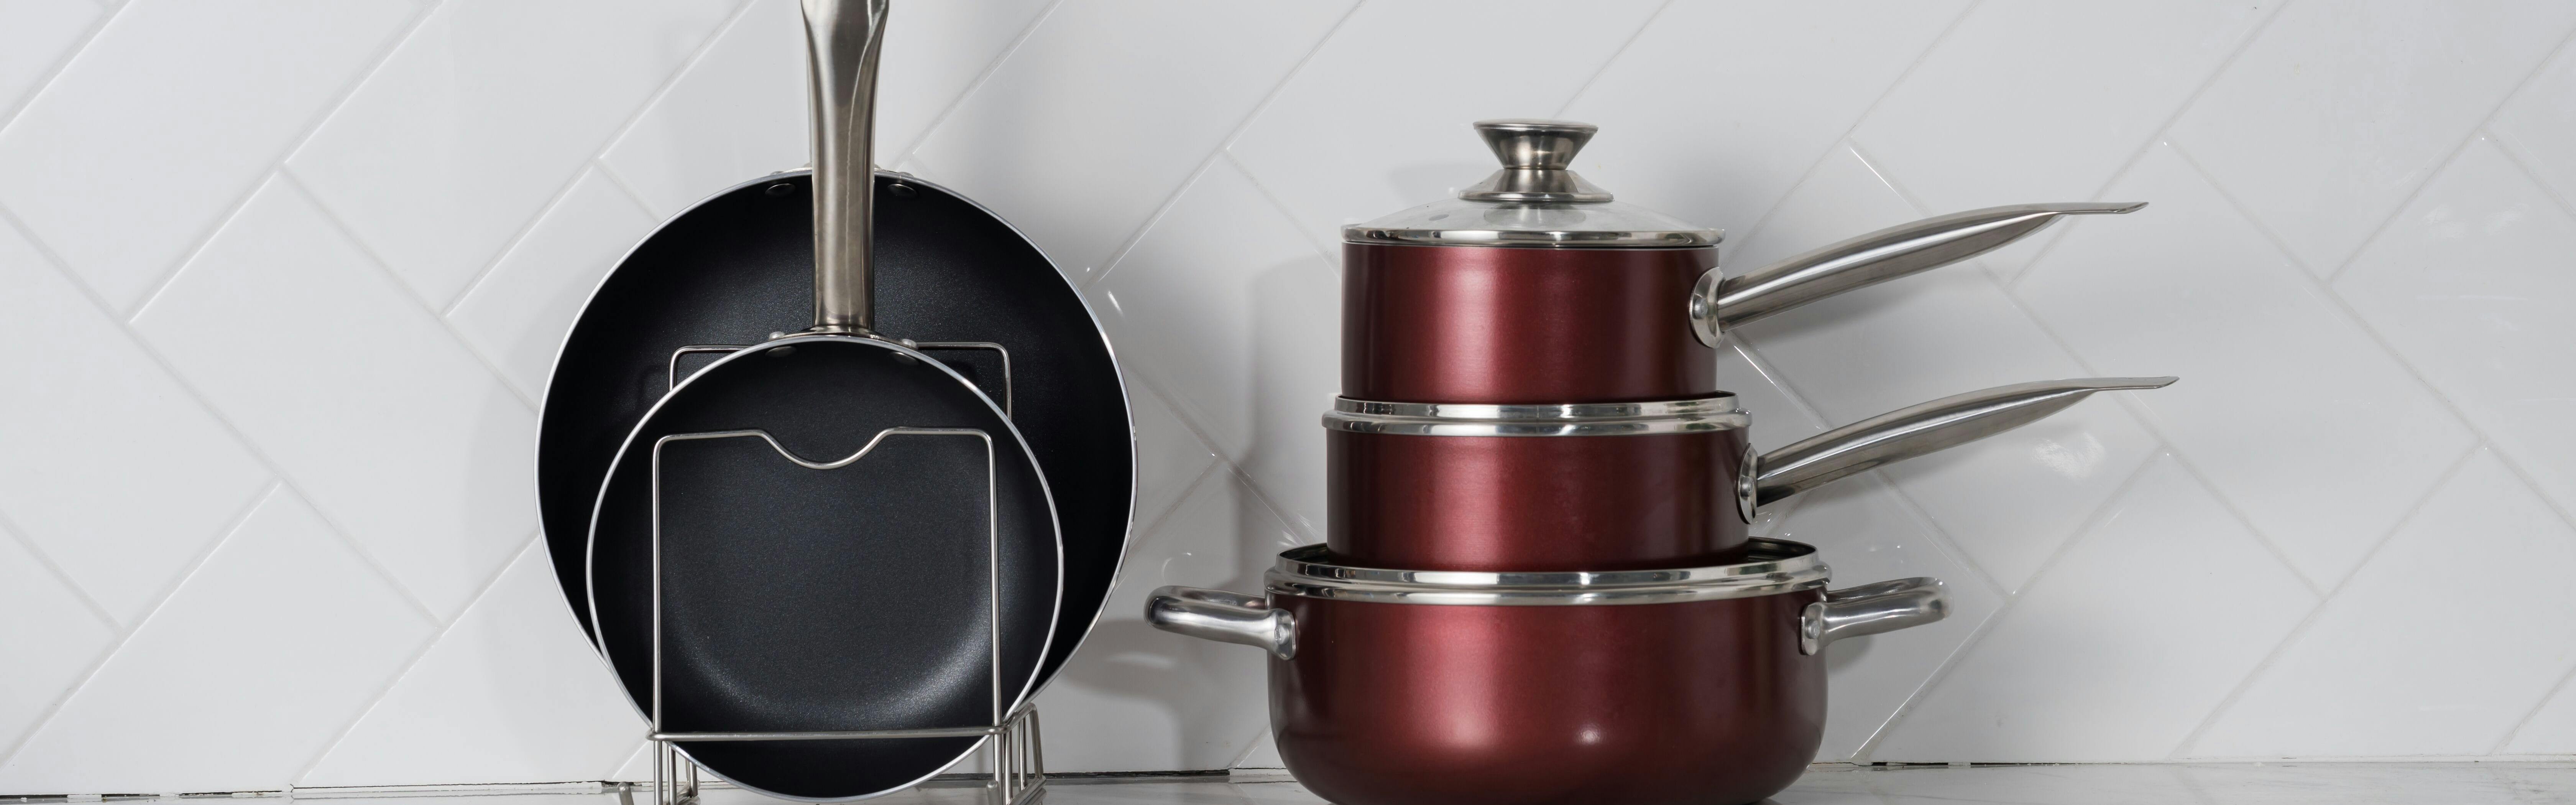 What's the Difference Between Nonstick and Stainless Steel Cookware?